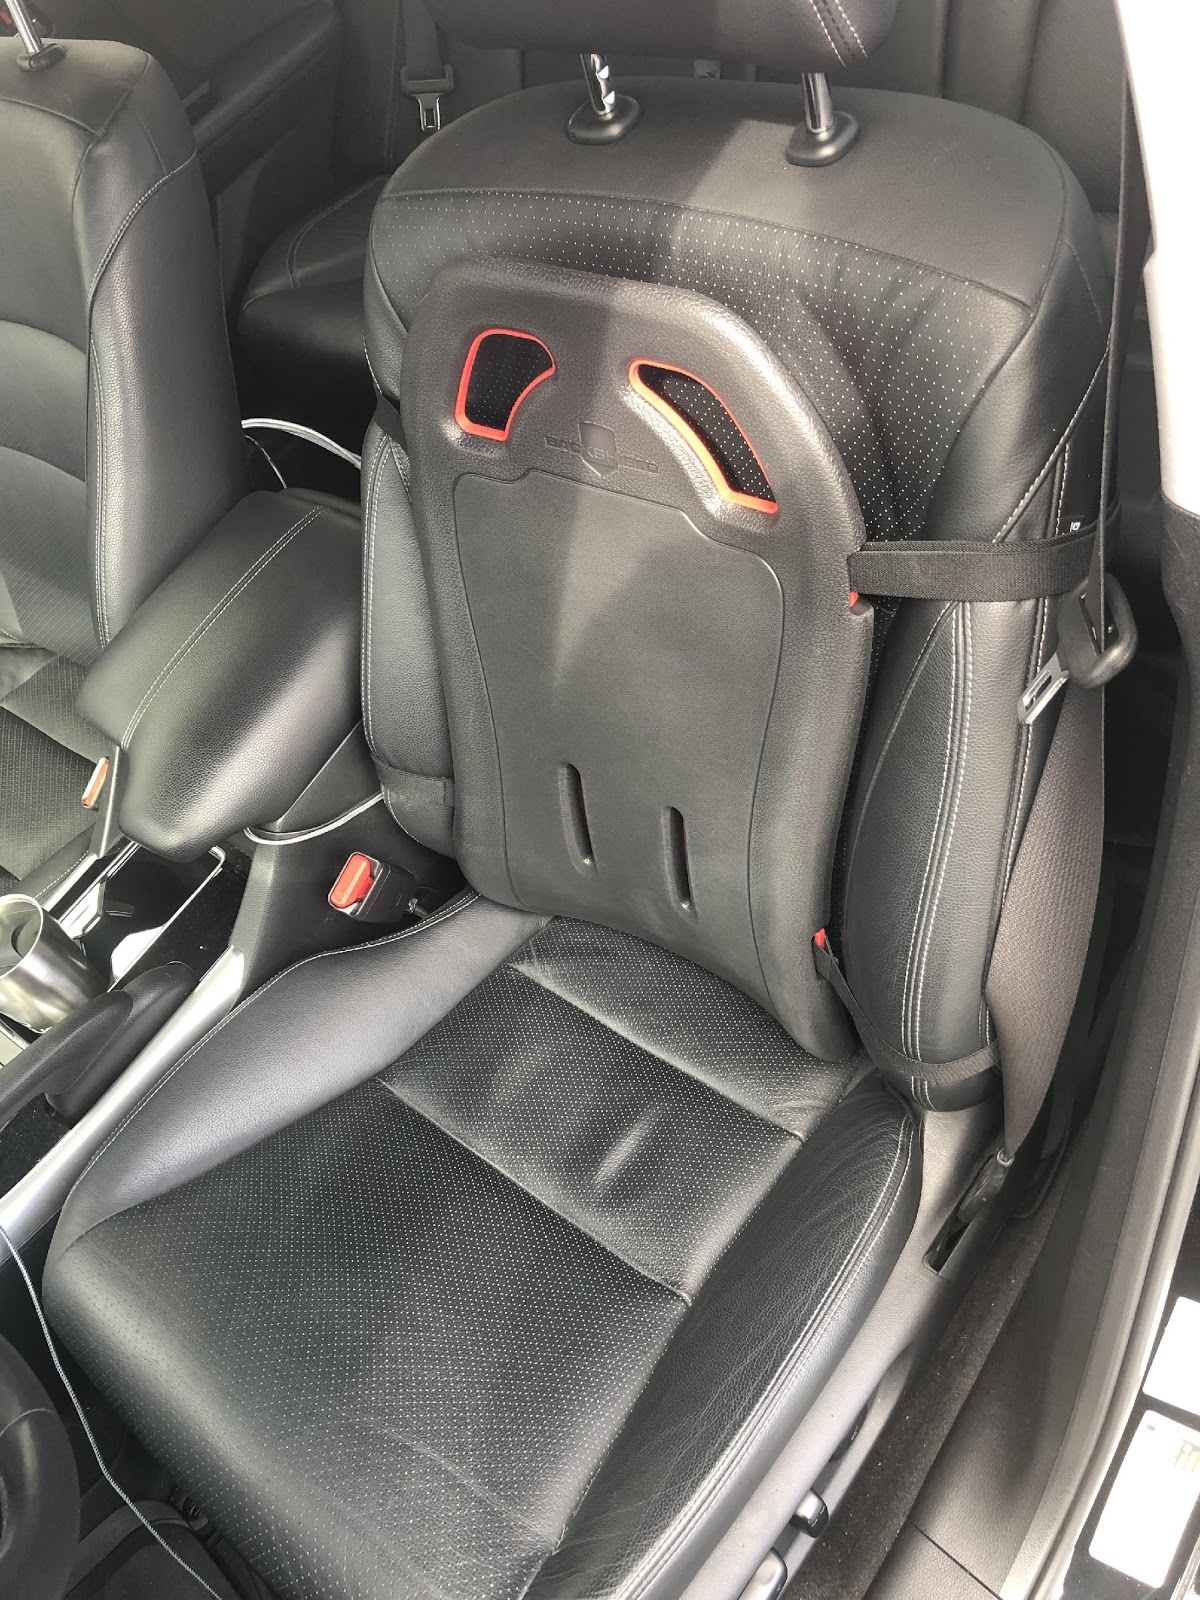 Best Back Support for Car Seats 2020 - The Backshield For Cars Trucks SUV  To Give Your Back Support 